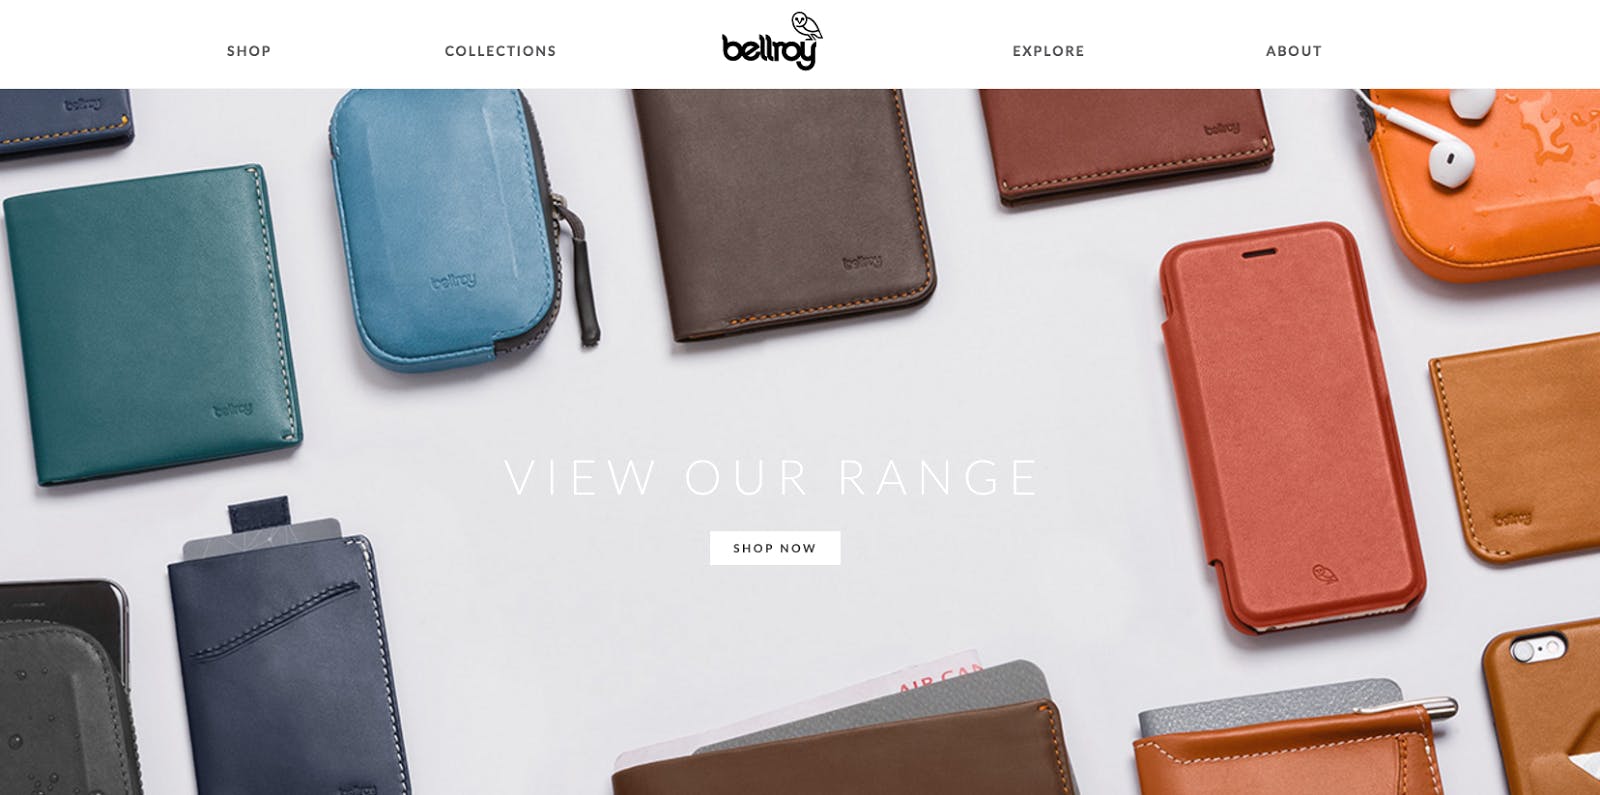 Bellroy on site photography impression